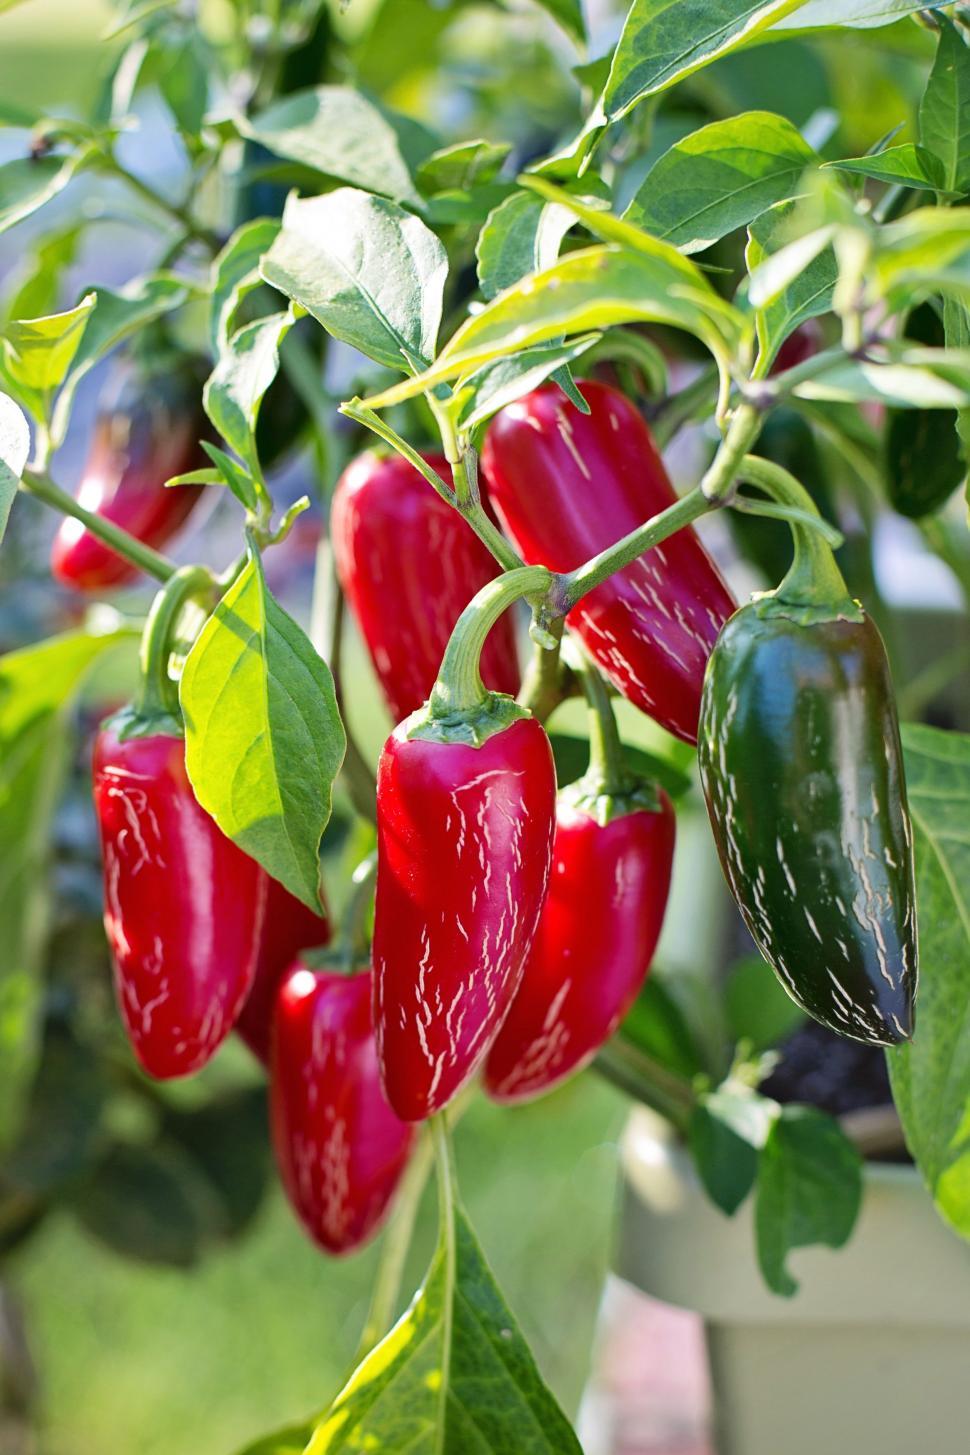 Download Free Stock Photo of Jalapeno pepper plant  